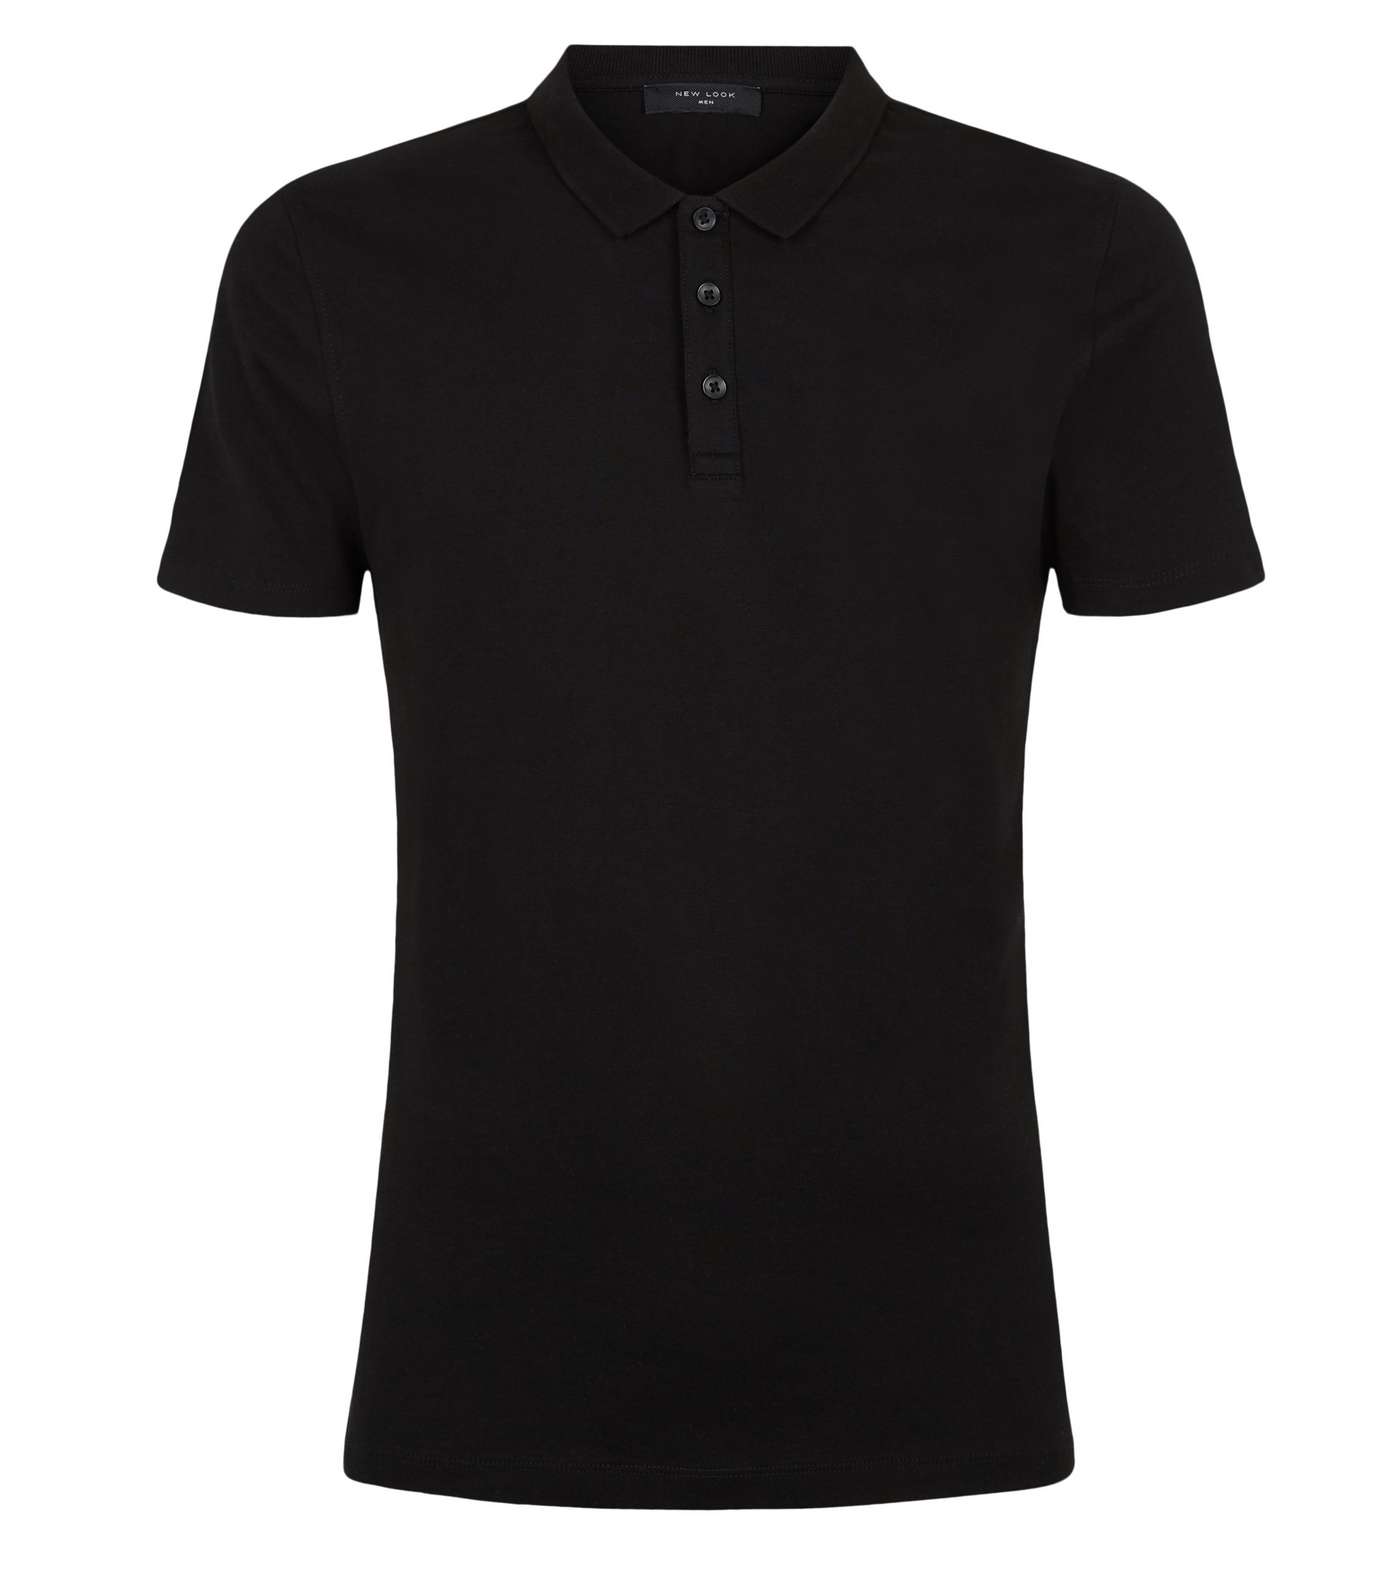 Black Muscle Fit Polo Shirt Image 6